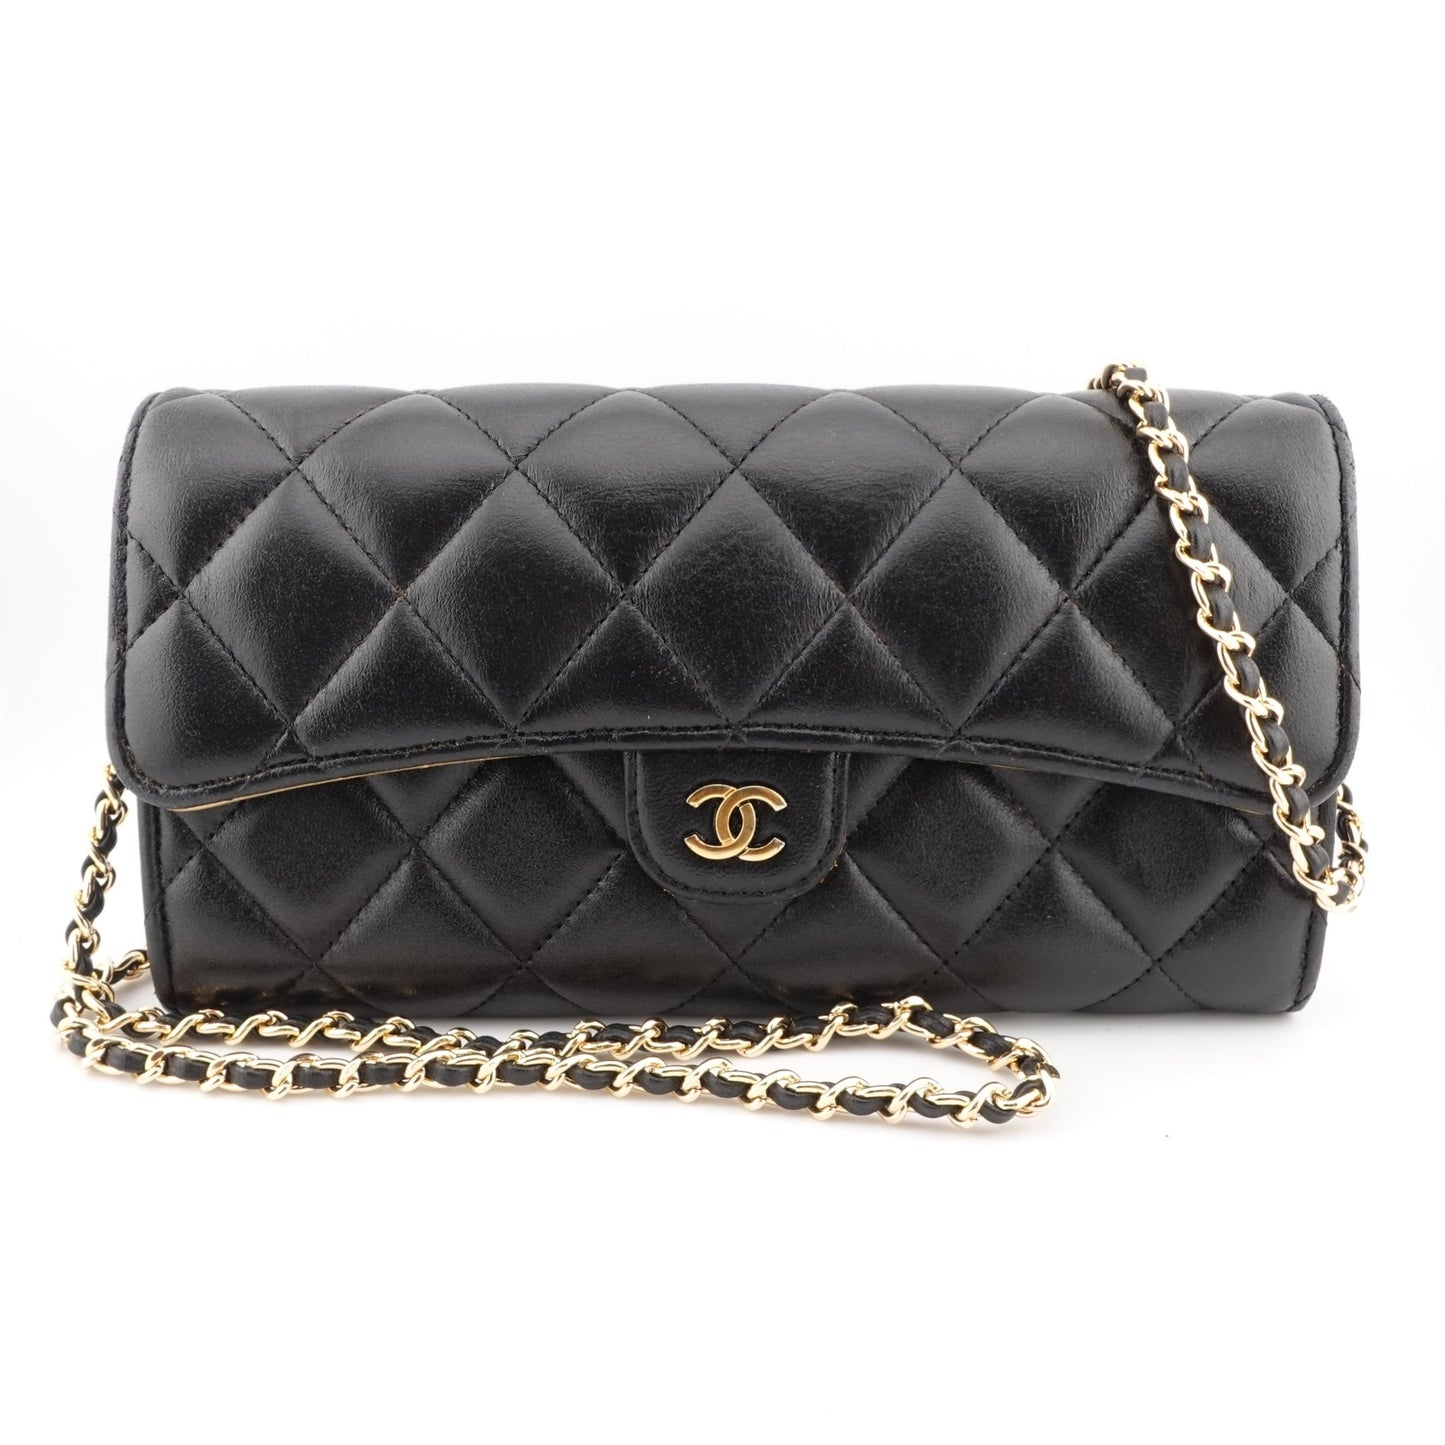 CHANEL Lambskin Classic Flap Gusseted Wallet on Chain - Bag Envy